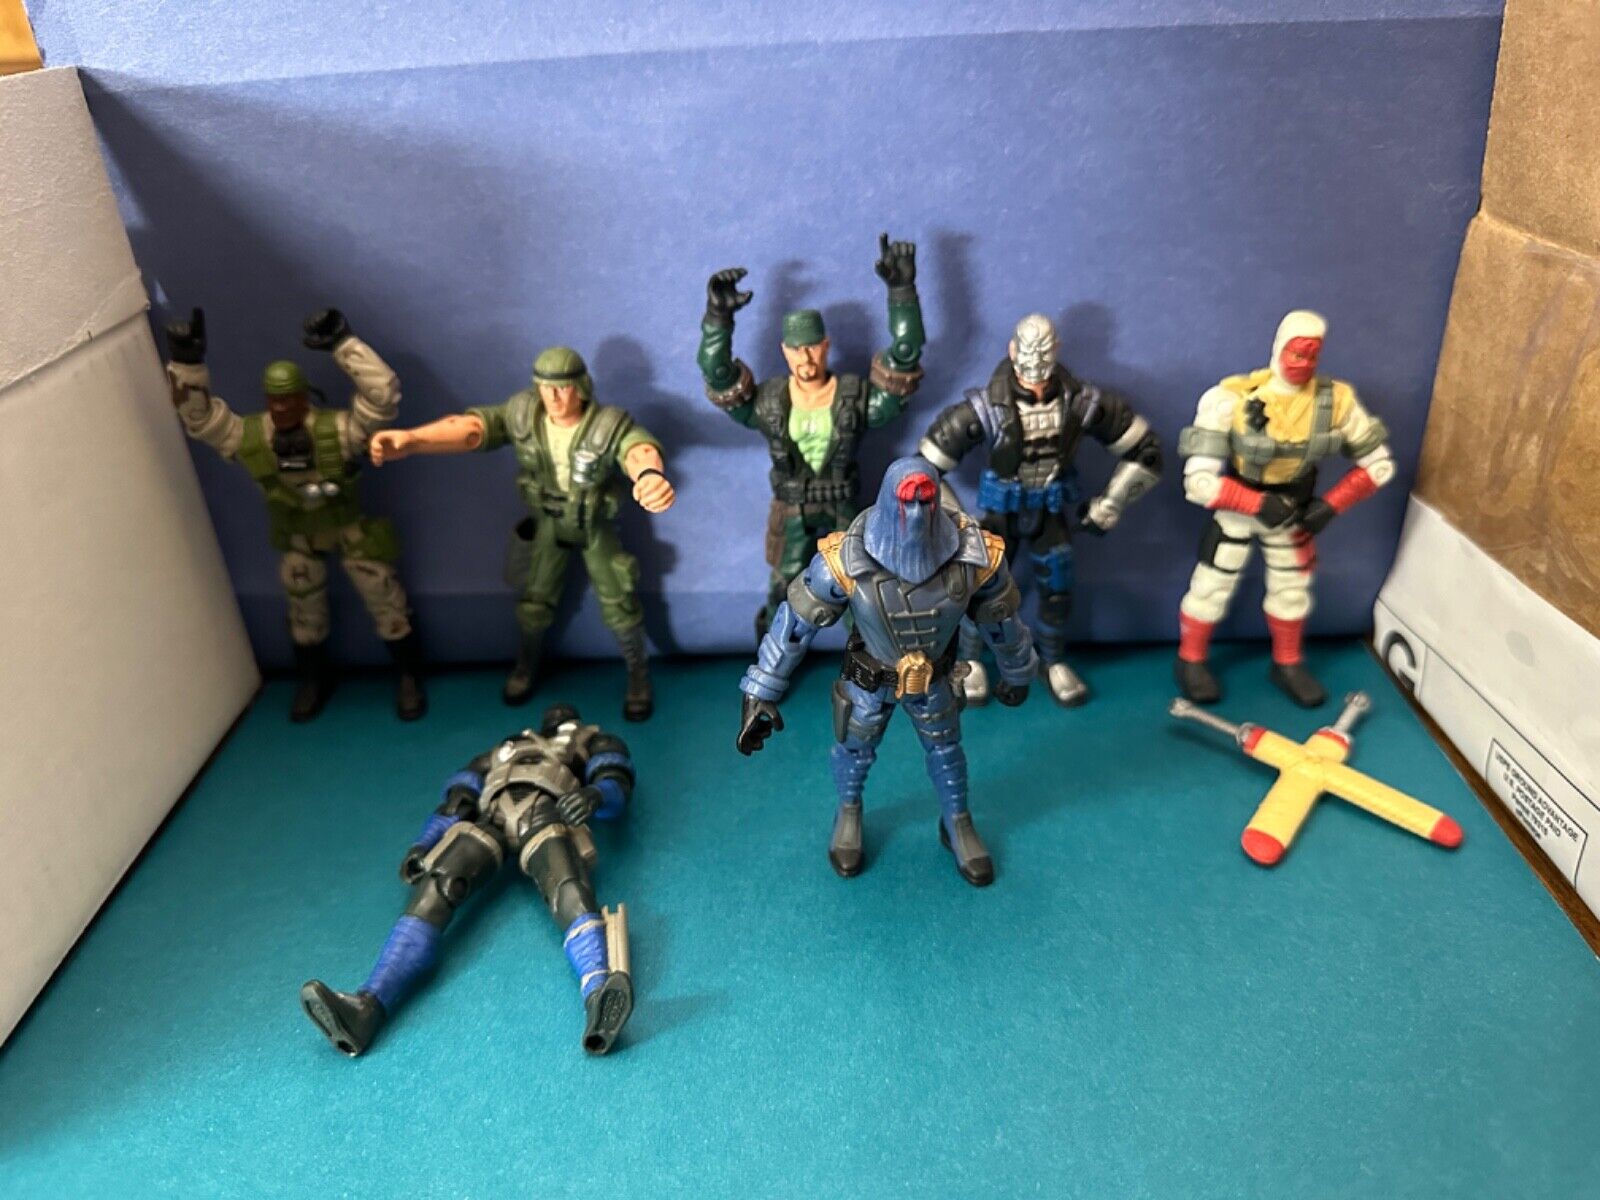 hasbro gi joe modern  figure X7 lot AS IS PICTURED IN THE PHOTO PROVIDED 